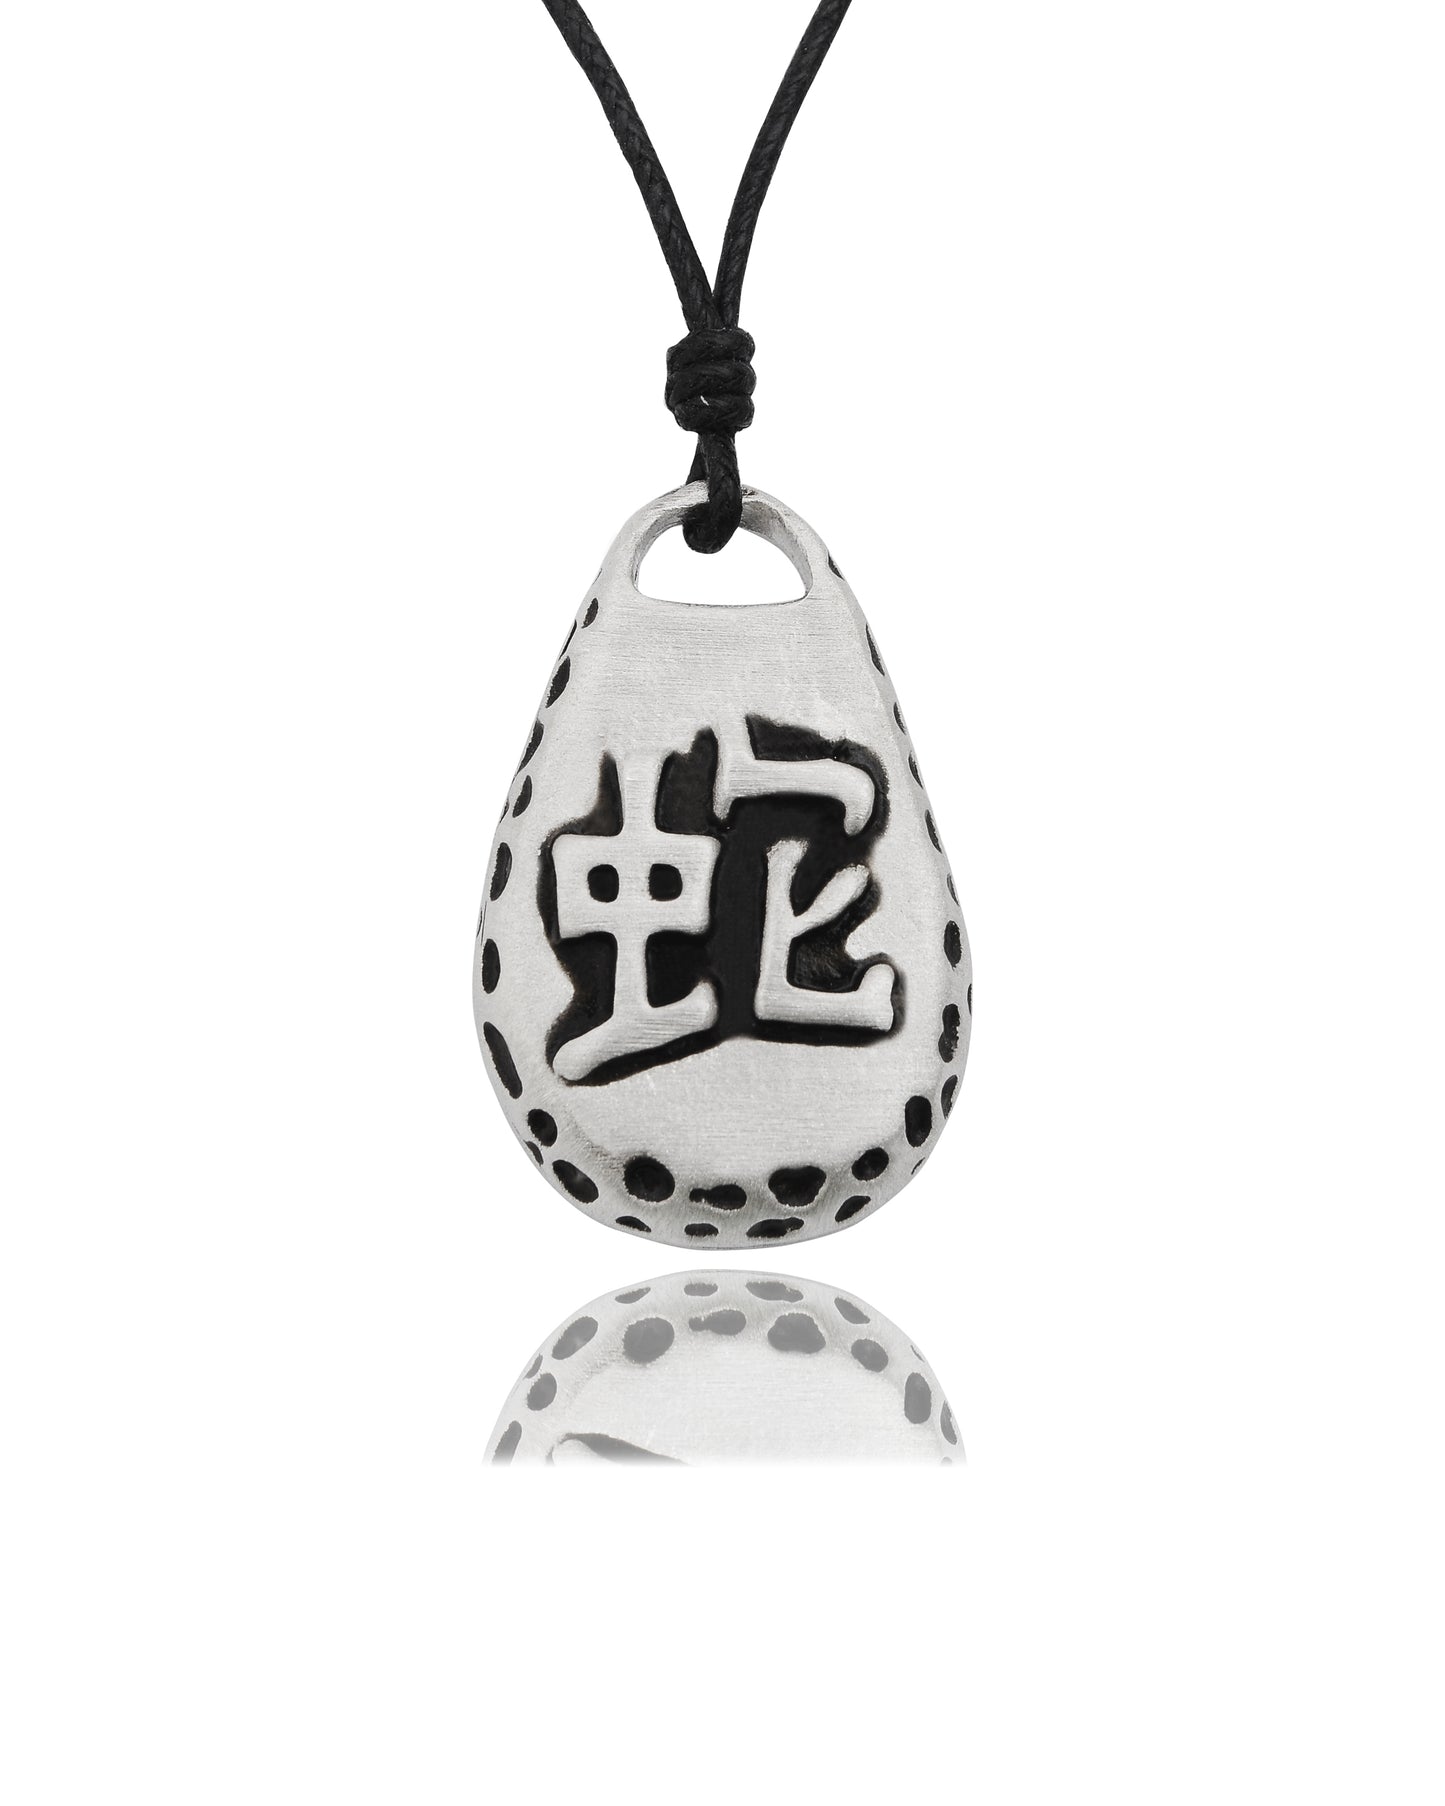 Chinese Zodiac Silver Pewter Charm Necklace Pendant Jewelry